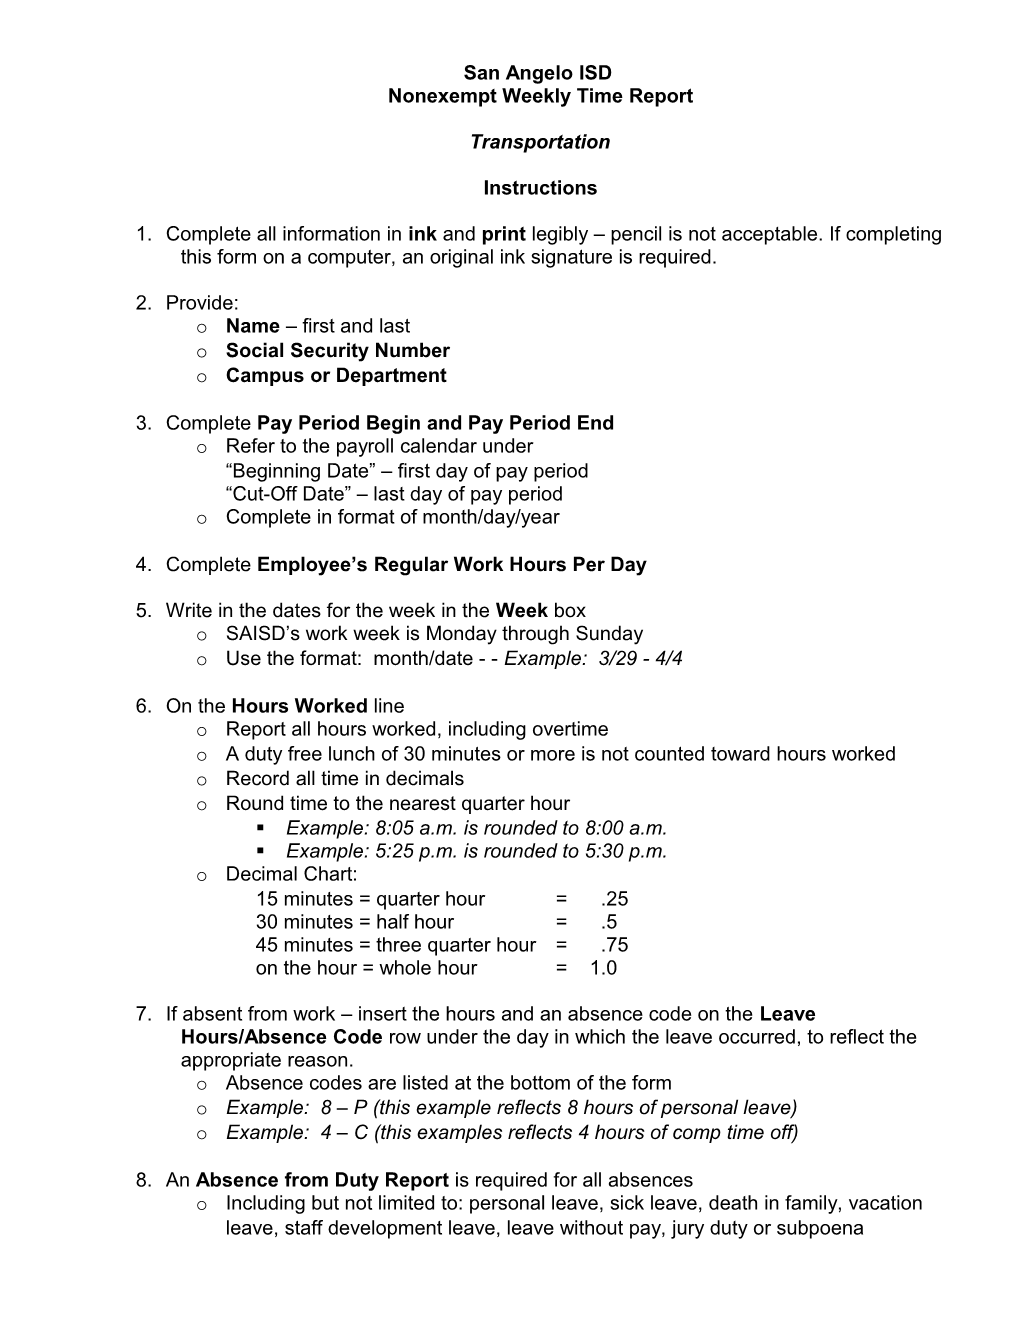 Sample Nonexempt Employee Weekly Time Report